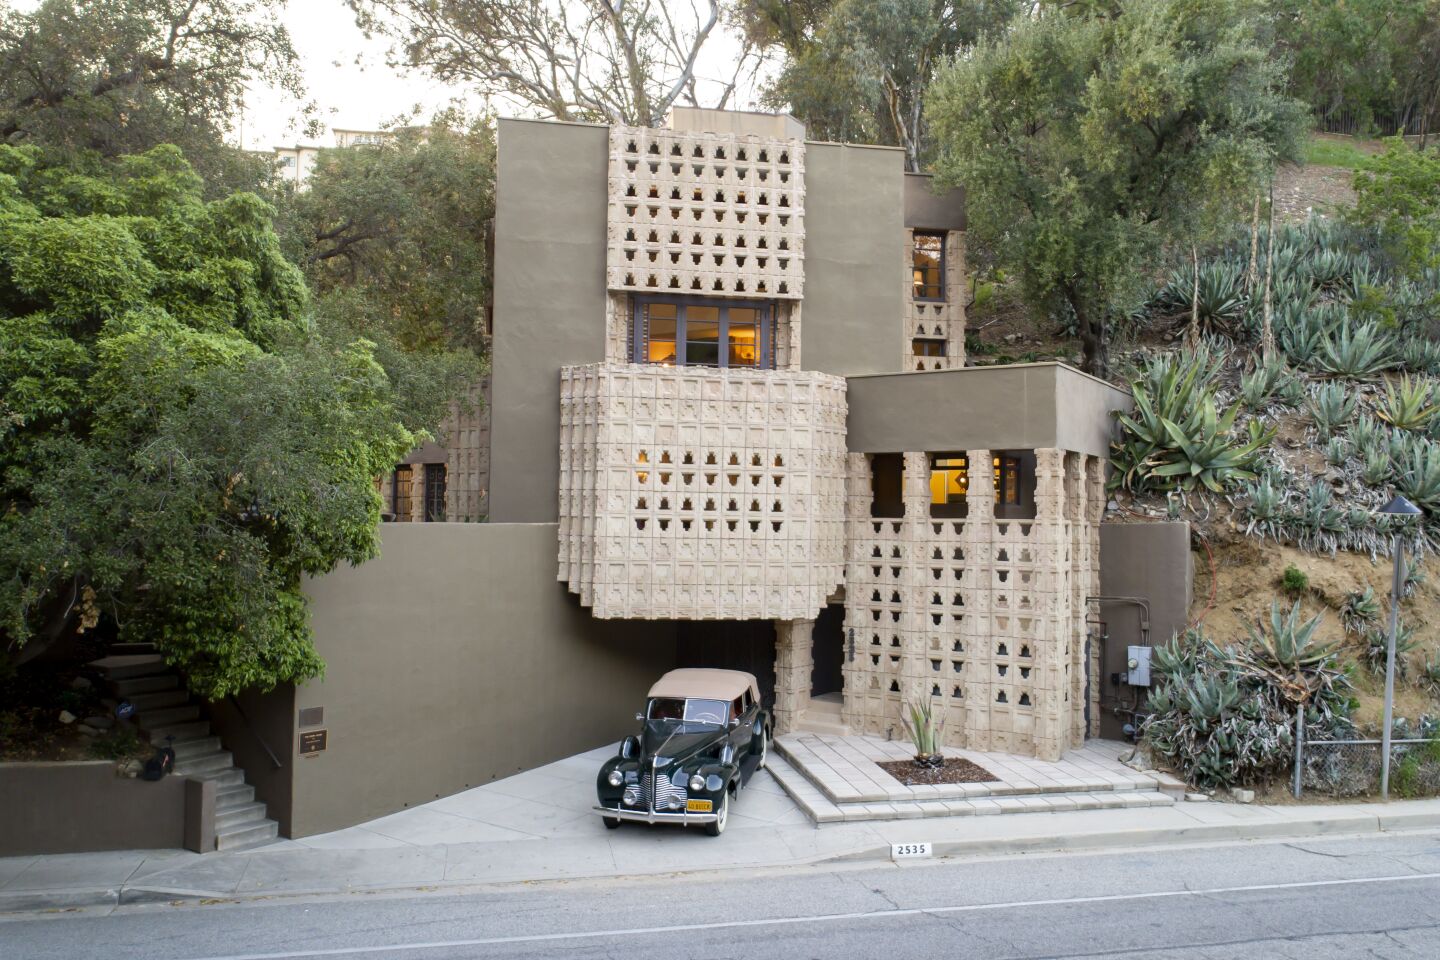 The Mayan Revival-style home.